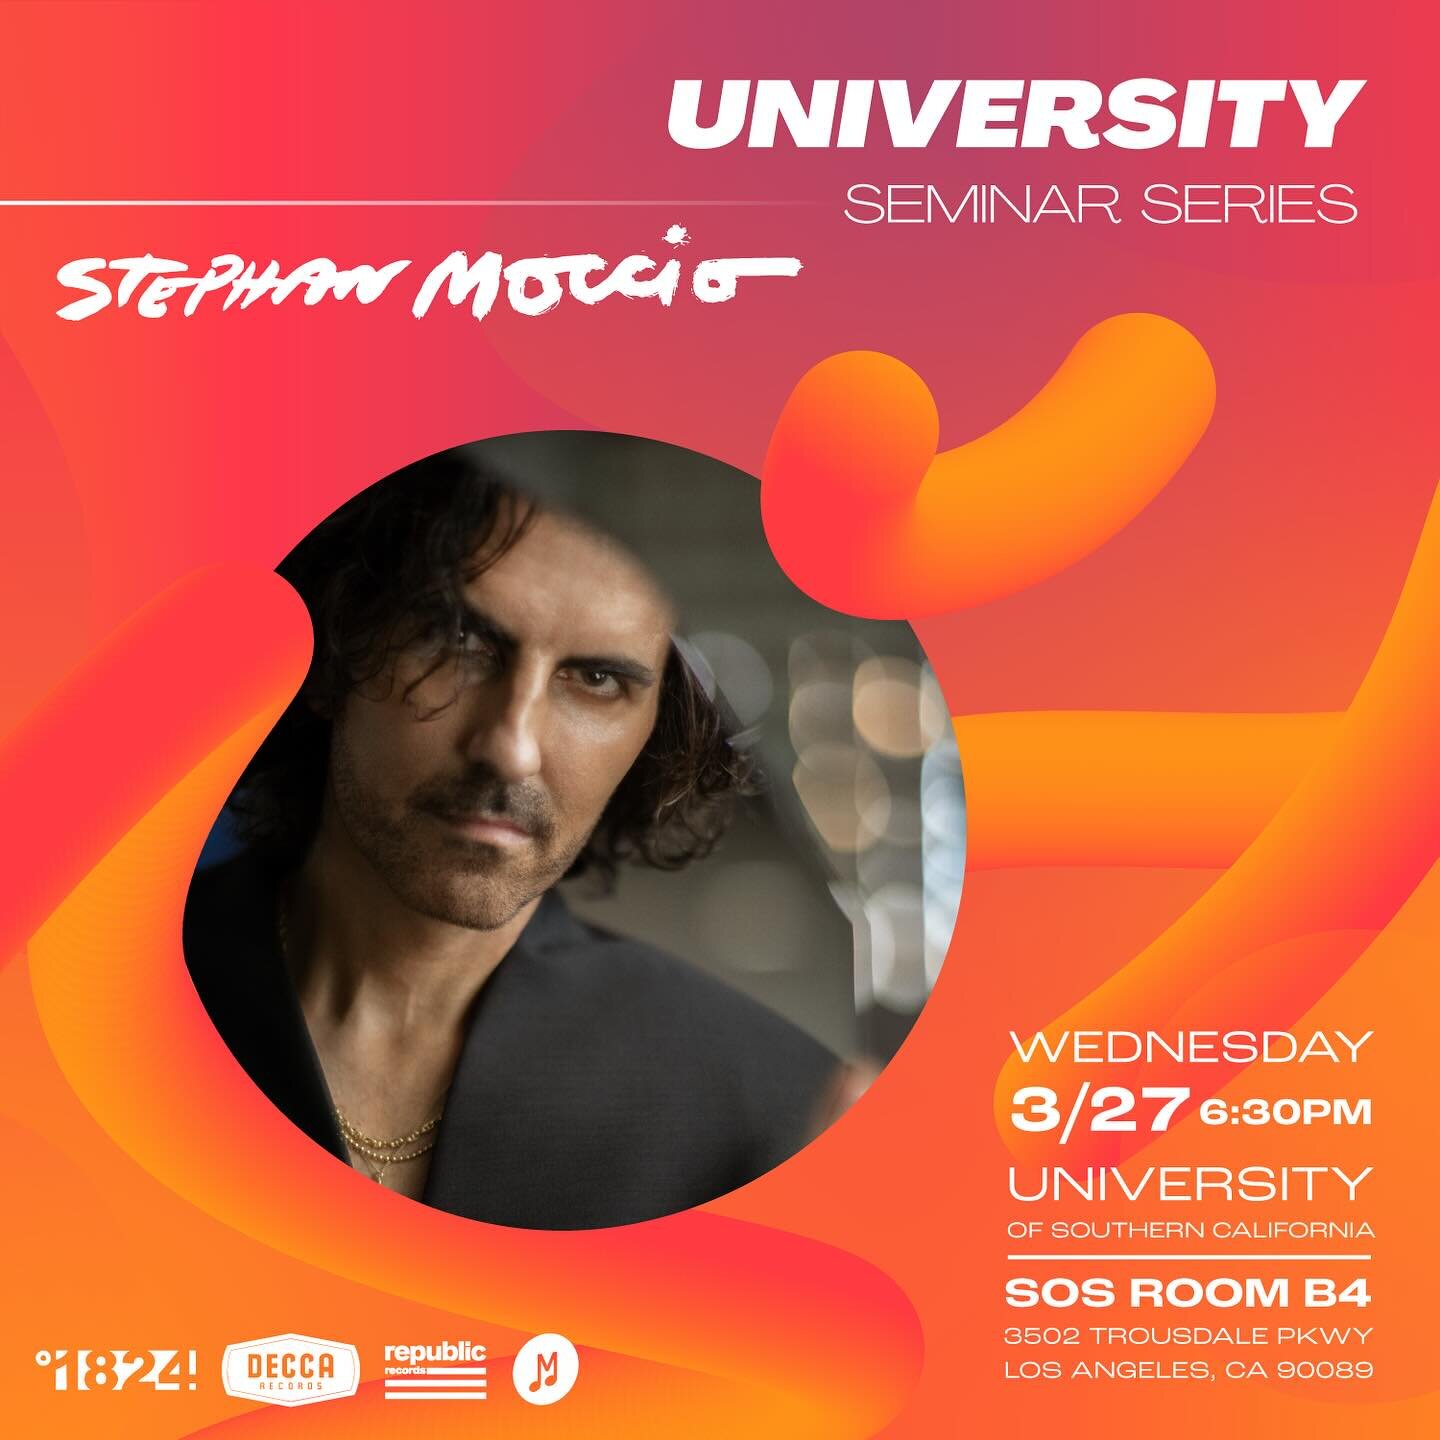 Join us for our latest collaboration with UMG x 1824 to host a conversation with Stephan Moccio! We are very lucky to be joined by such an accomplished writer and look forward to inspiring some of the next big hits from our FAM writers and producers.